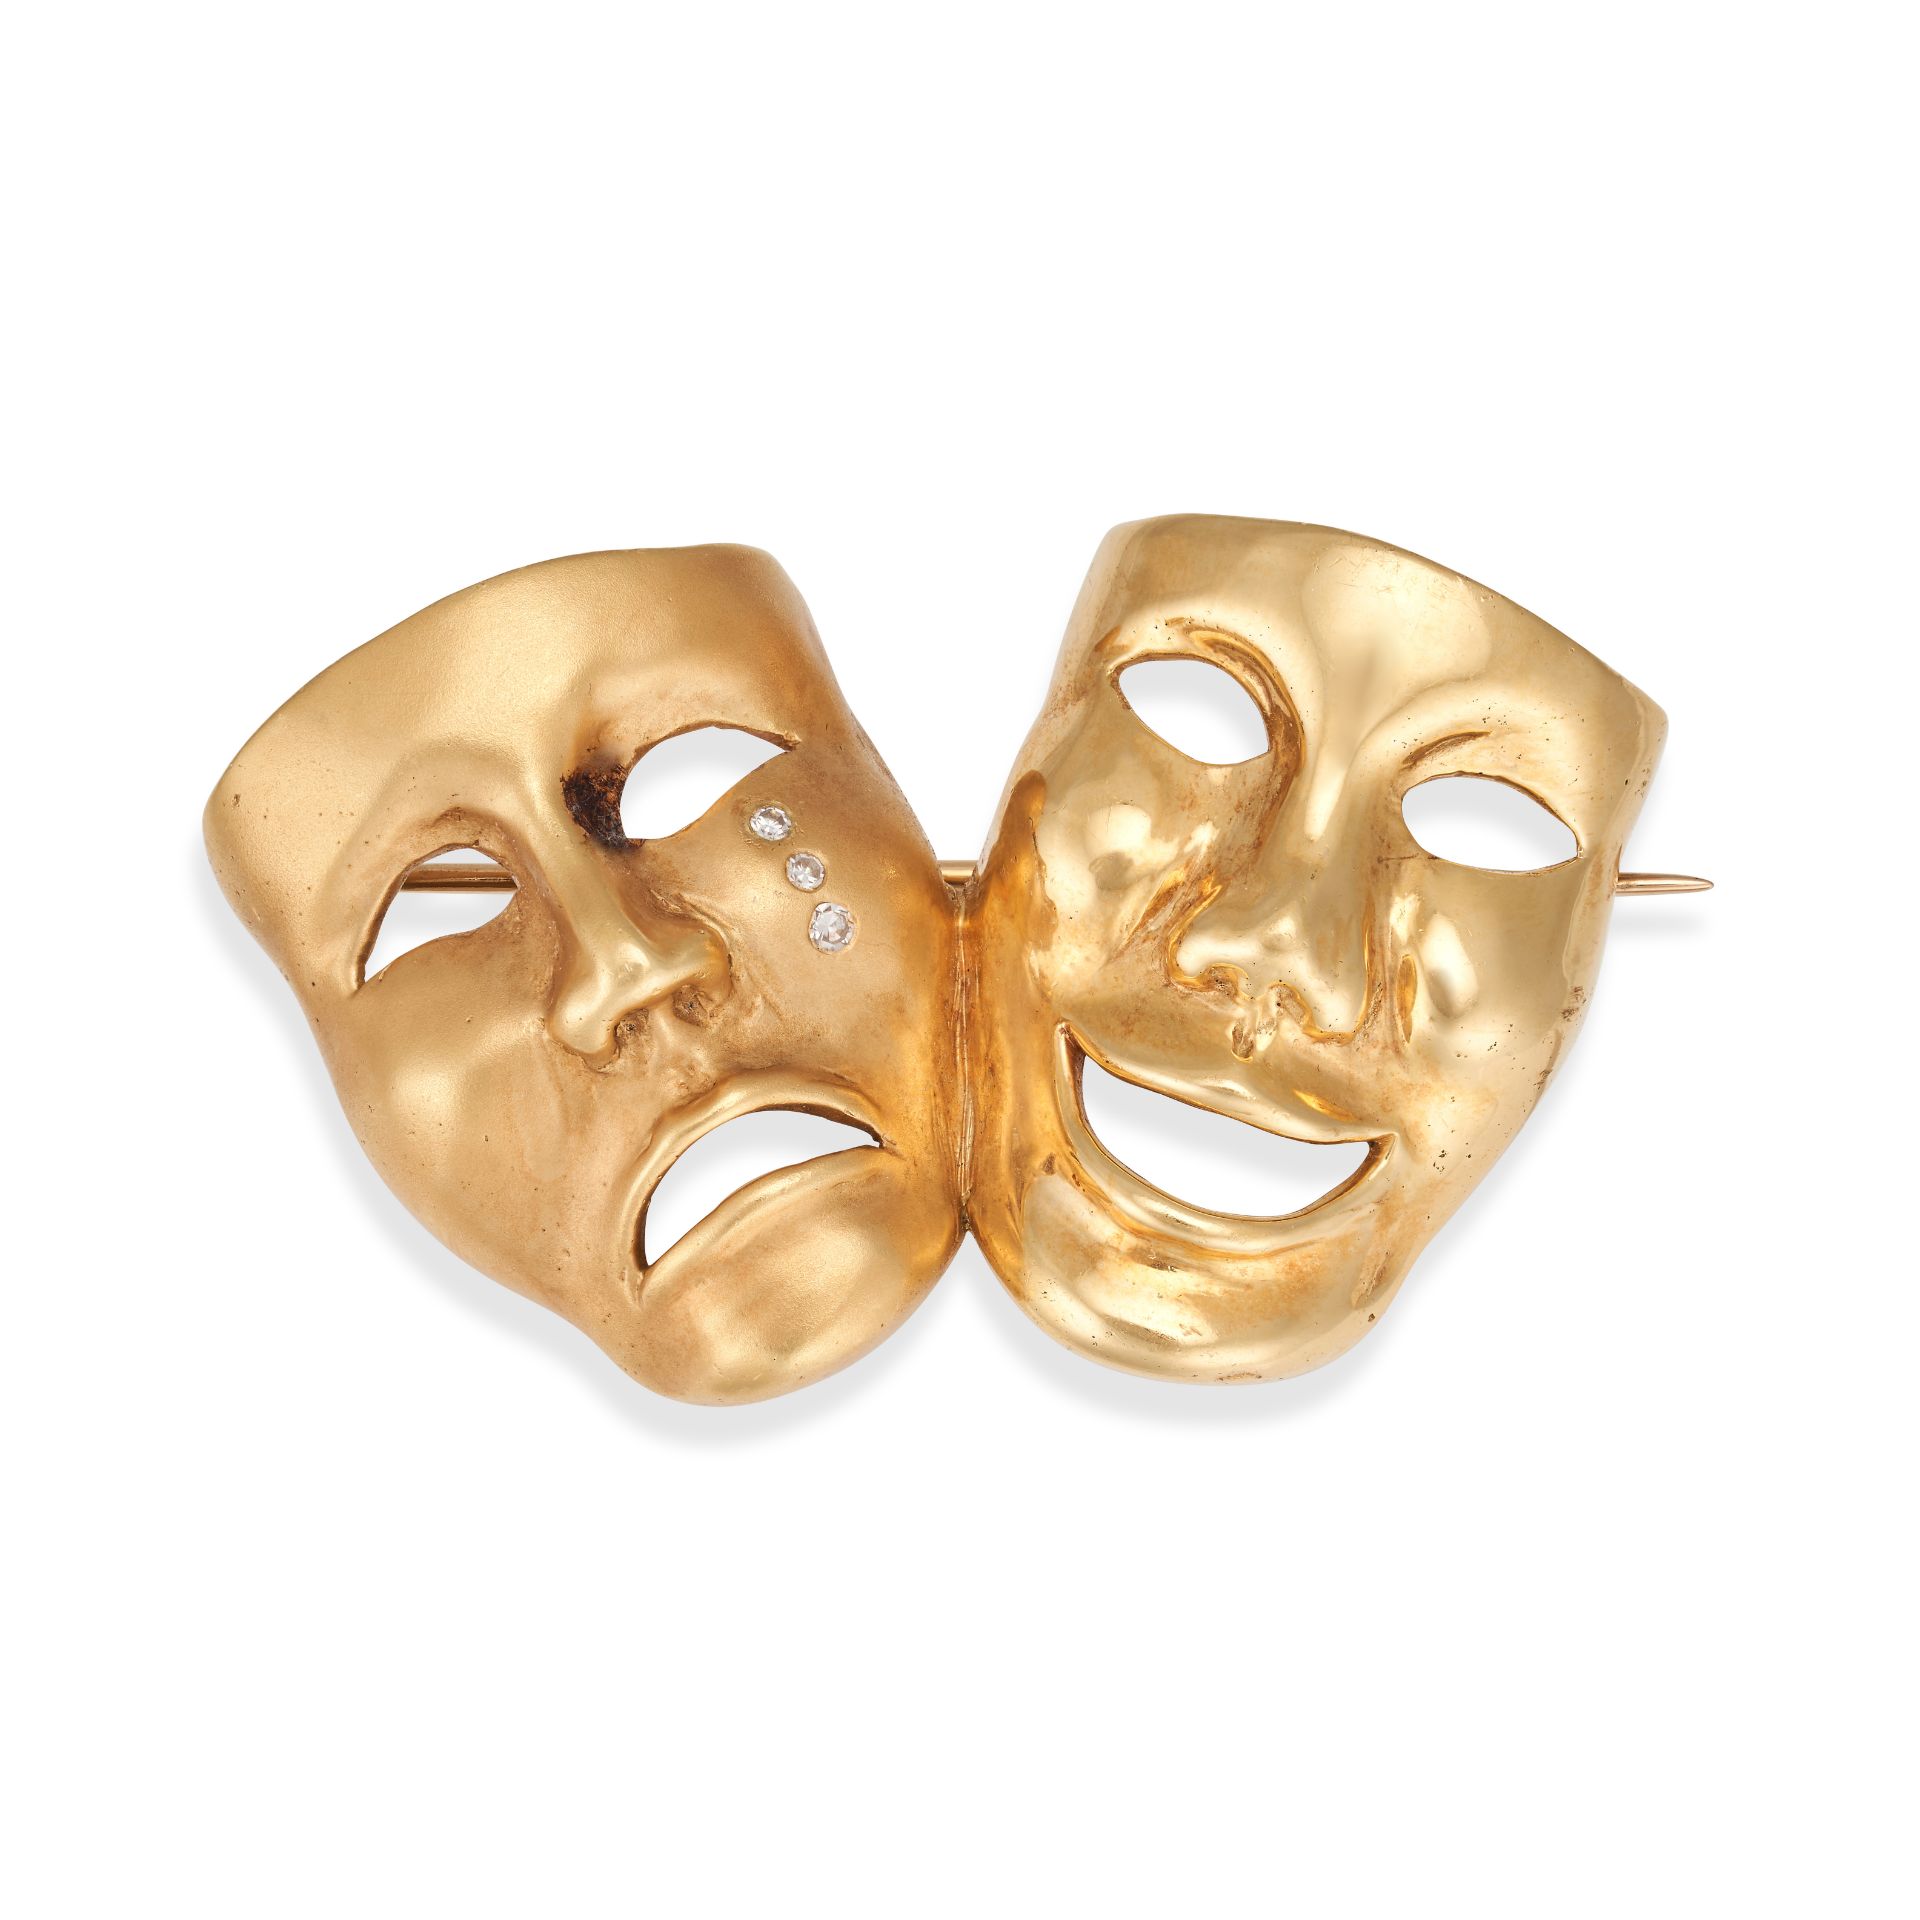 A DIAMOND COMEDY AND TRAGEDY MASK BROOCH in yellow gold, designed as the Comedy and Tragedy Masks...